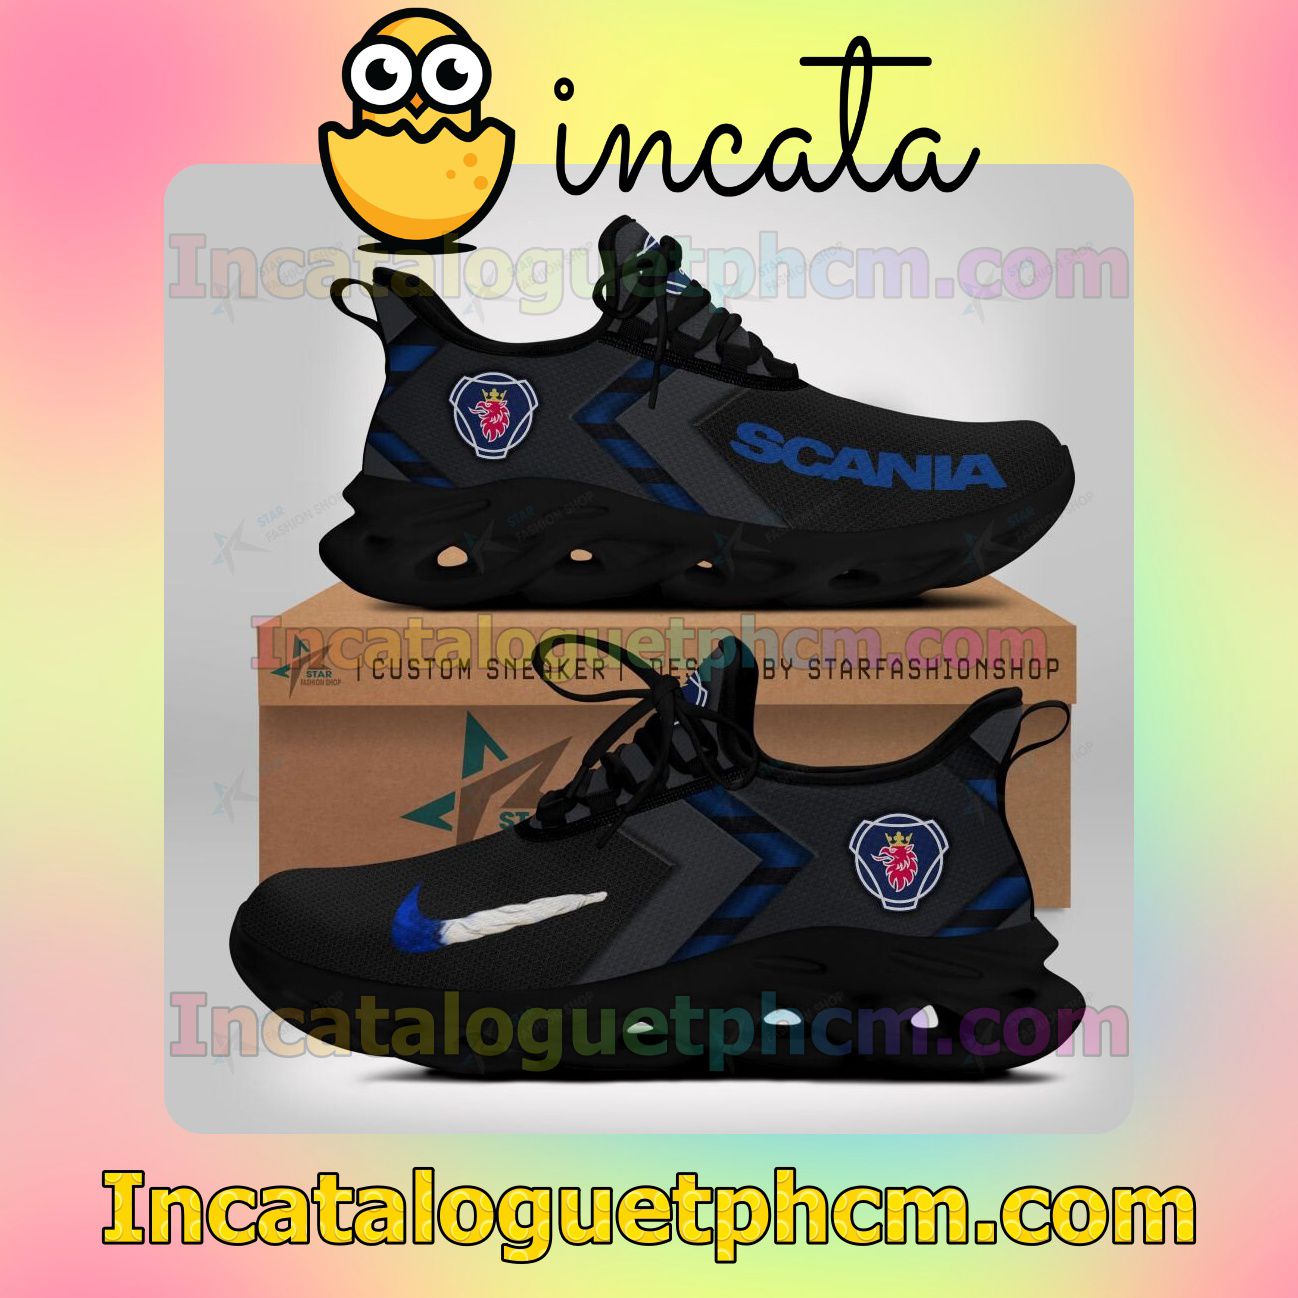 Official Scania Women Fashion Sneakers